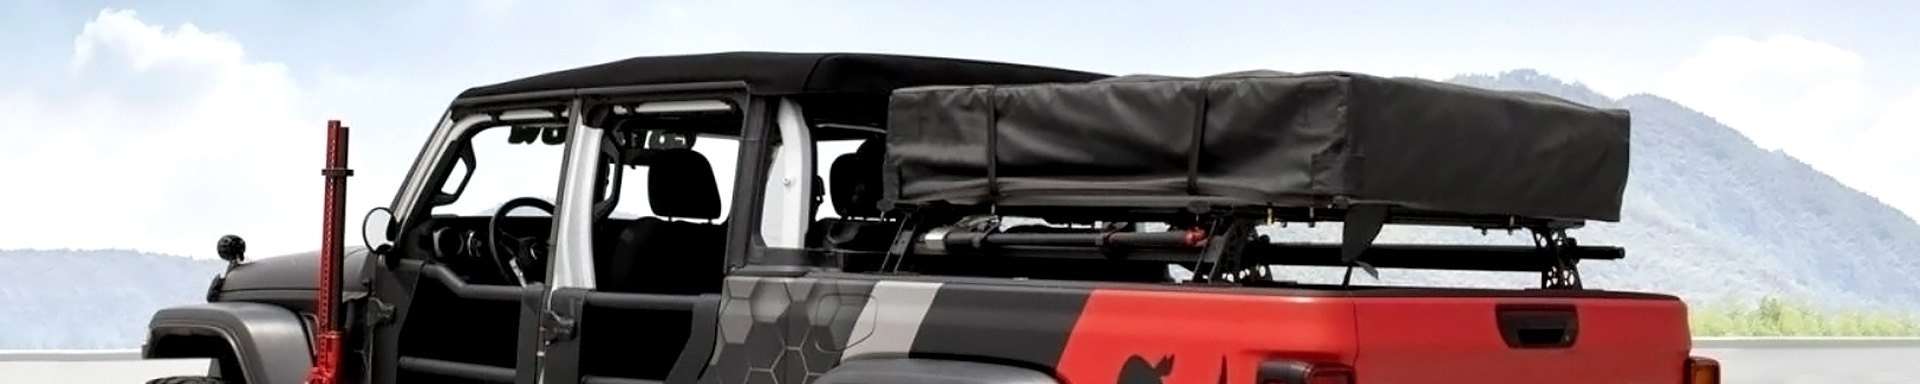 Go Rhino XRS Cross Bars Allow for Extending Truck Bed Utility and Cargo Capacity